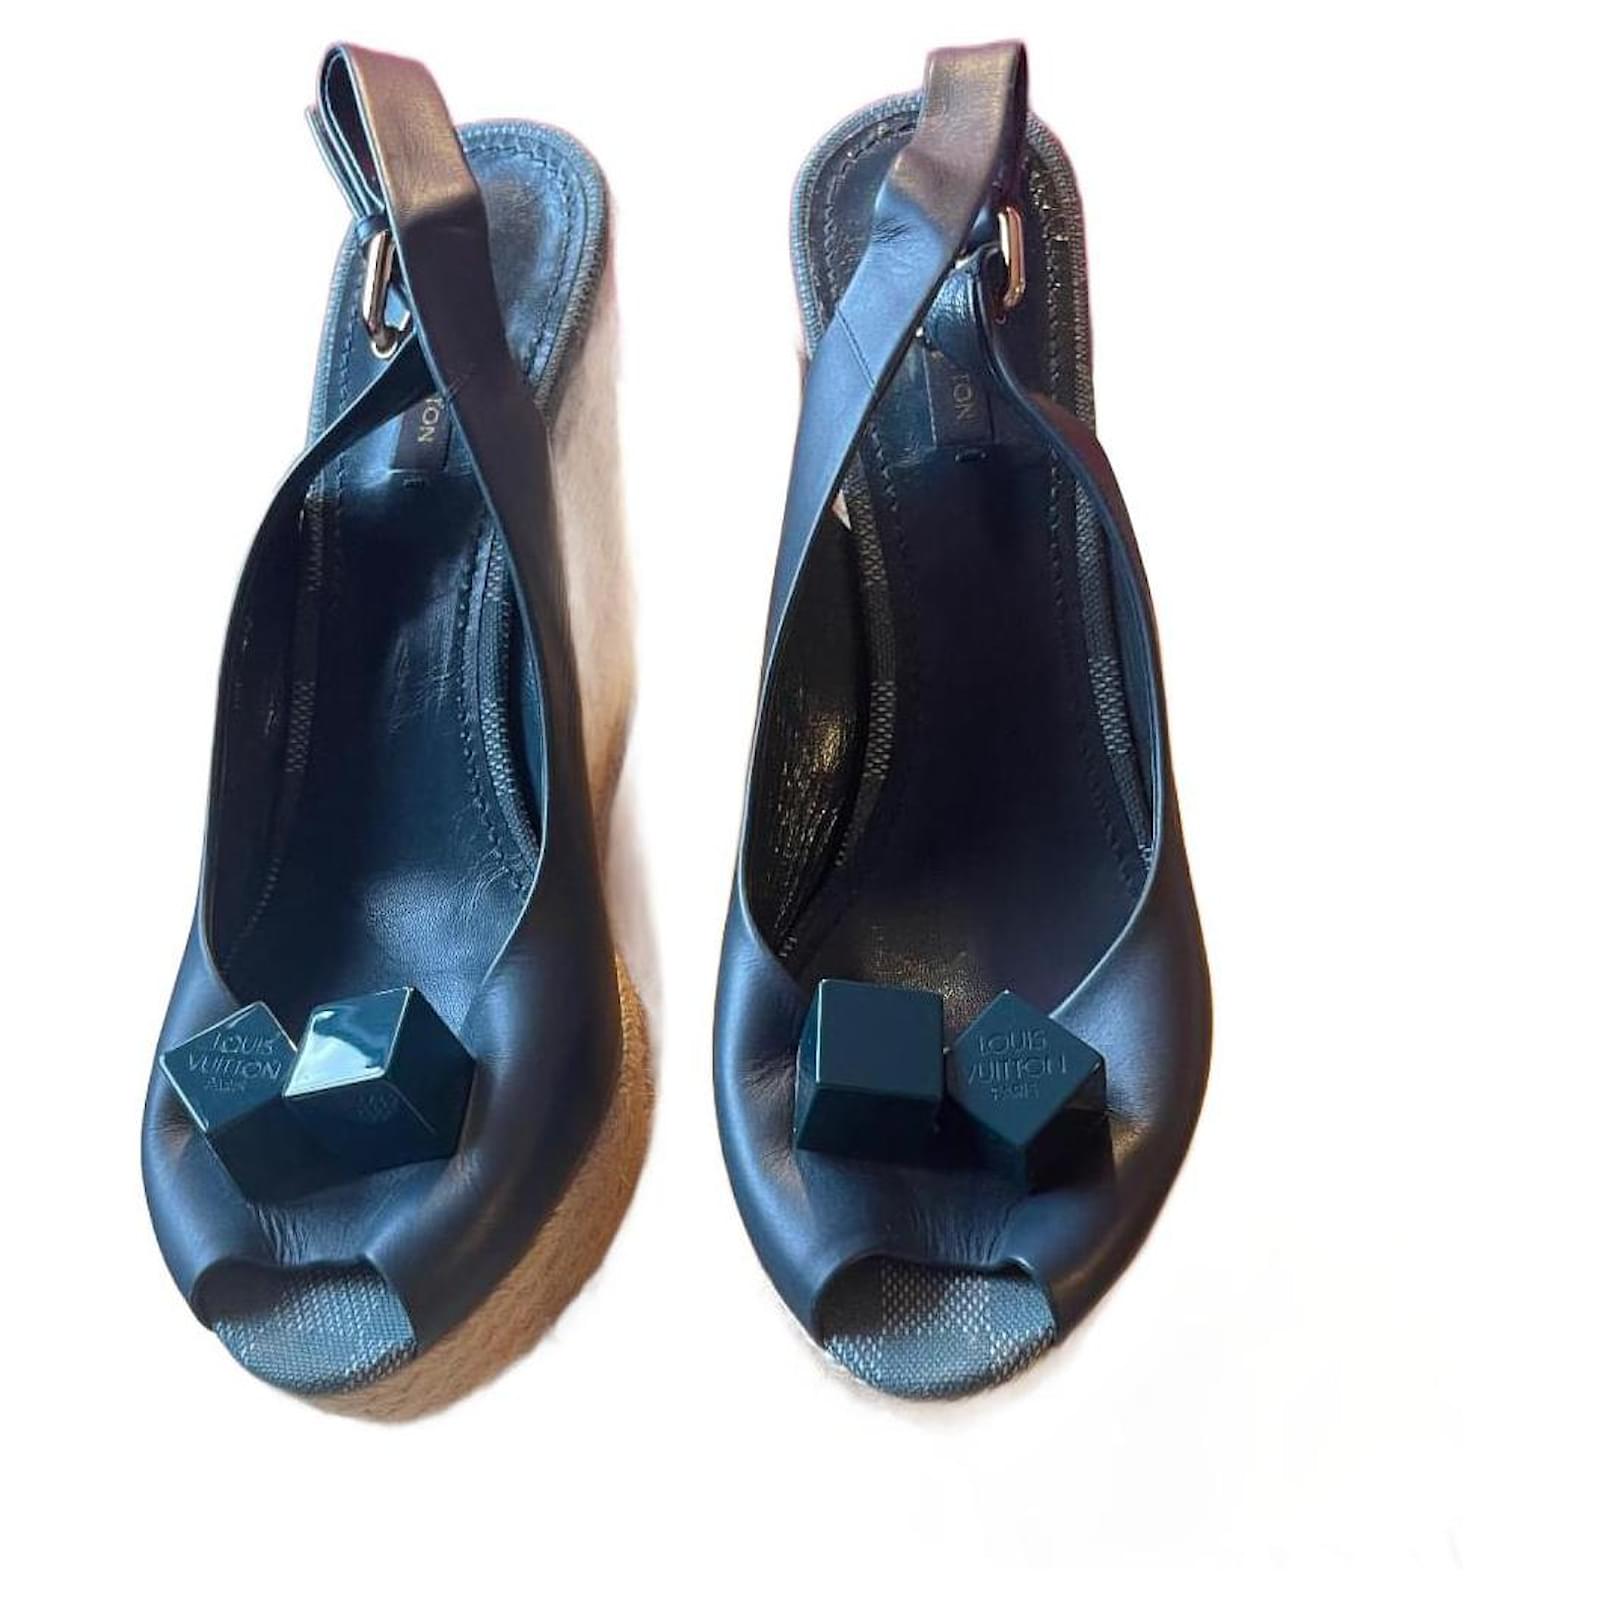 Louis Vuitton Pre-owned Women's Leather Slippers - Blue - EU 37.5